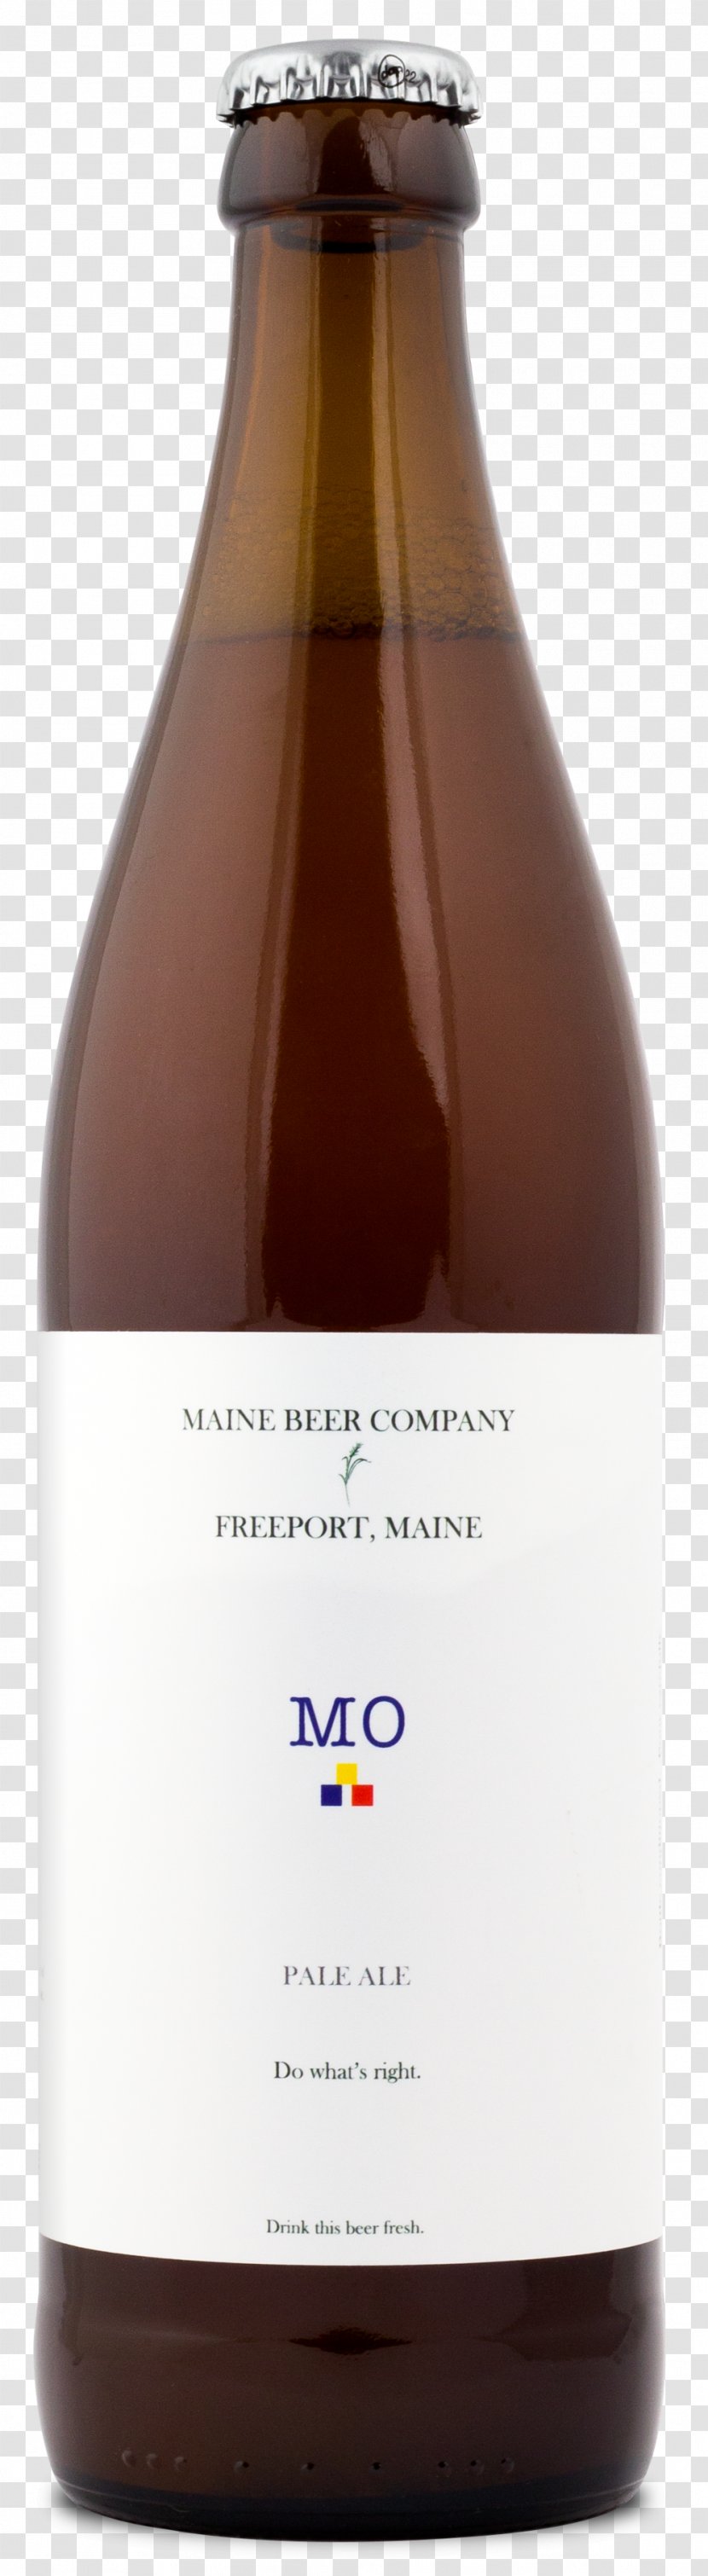 Maine Beer Company Pale Ale Bottle - India Transparent PNG